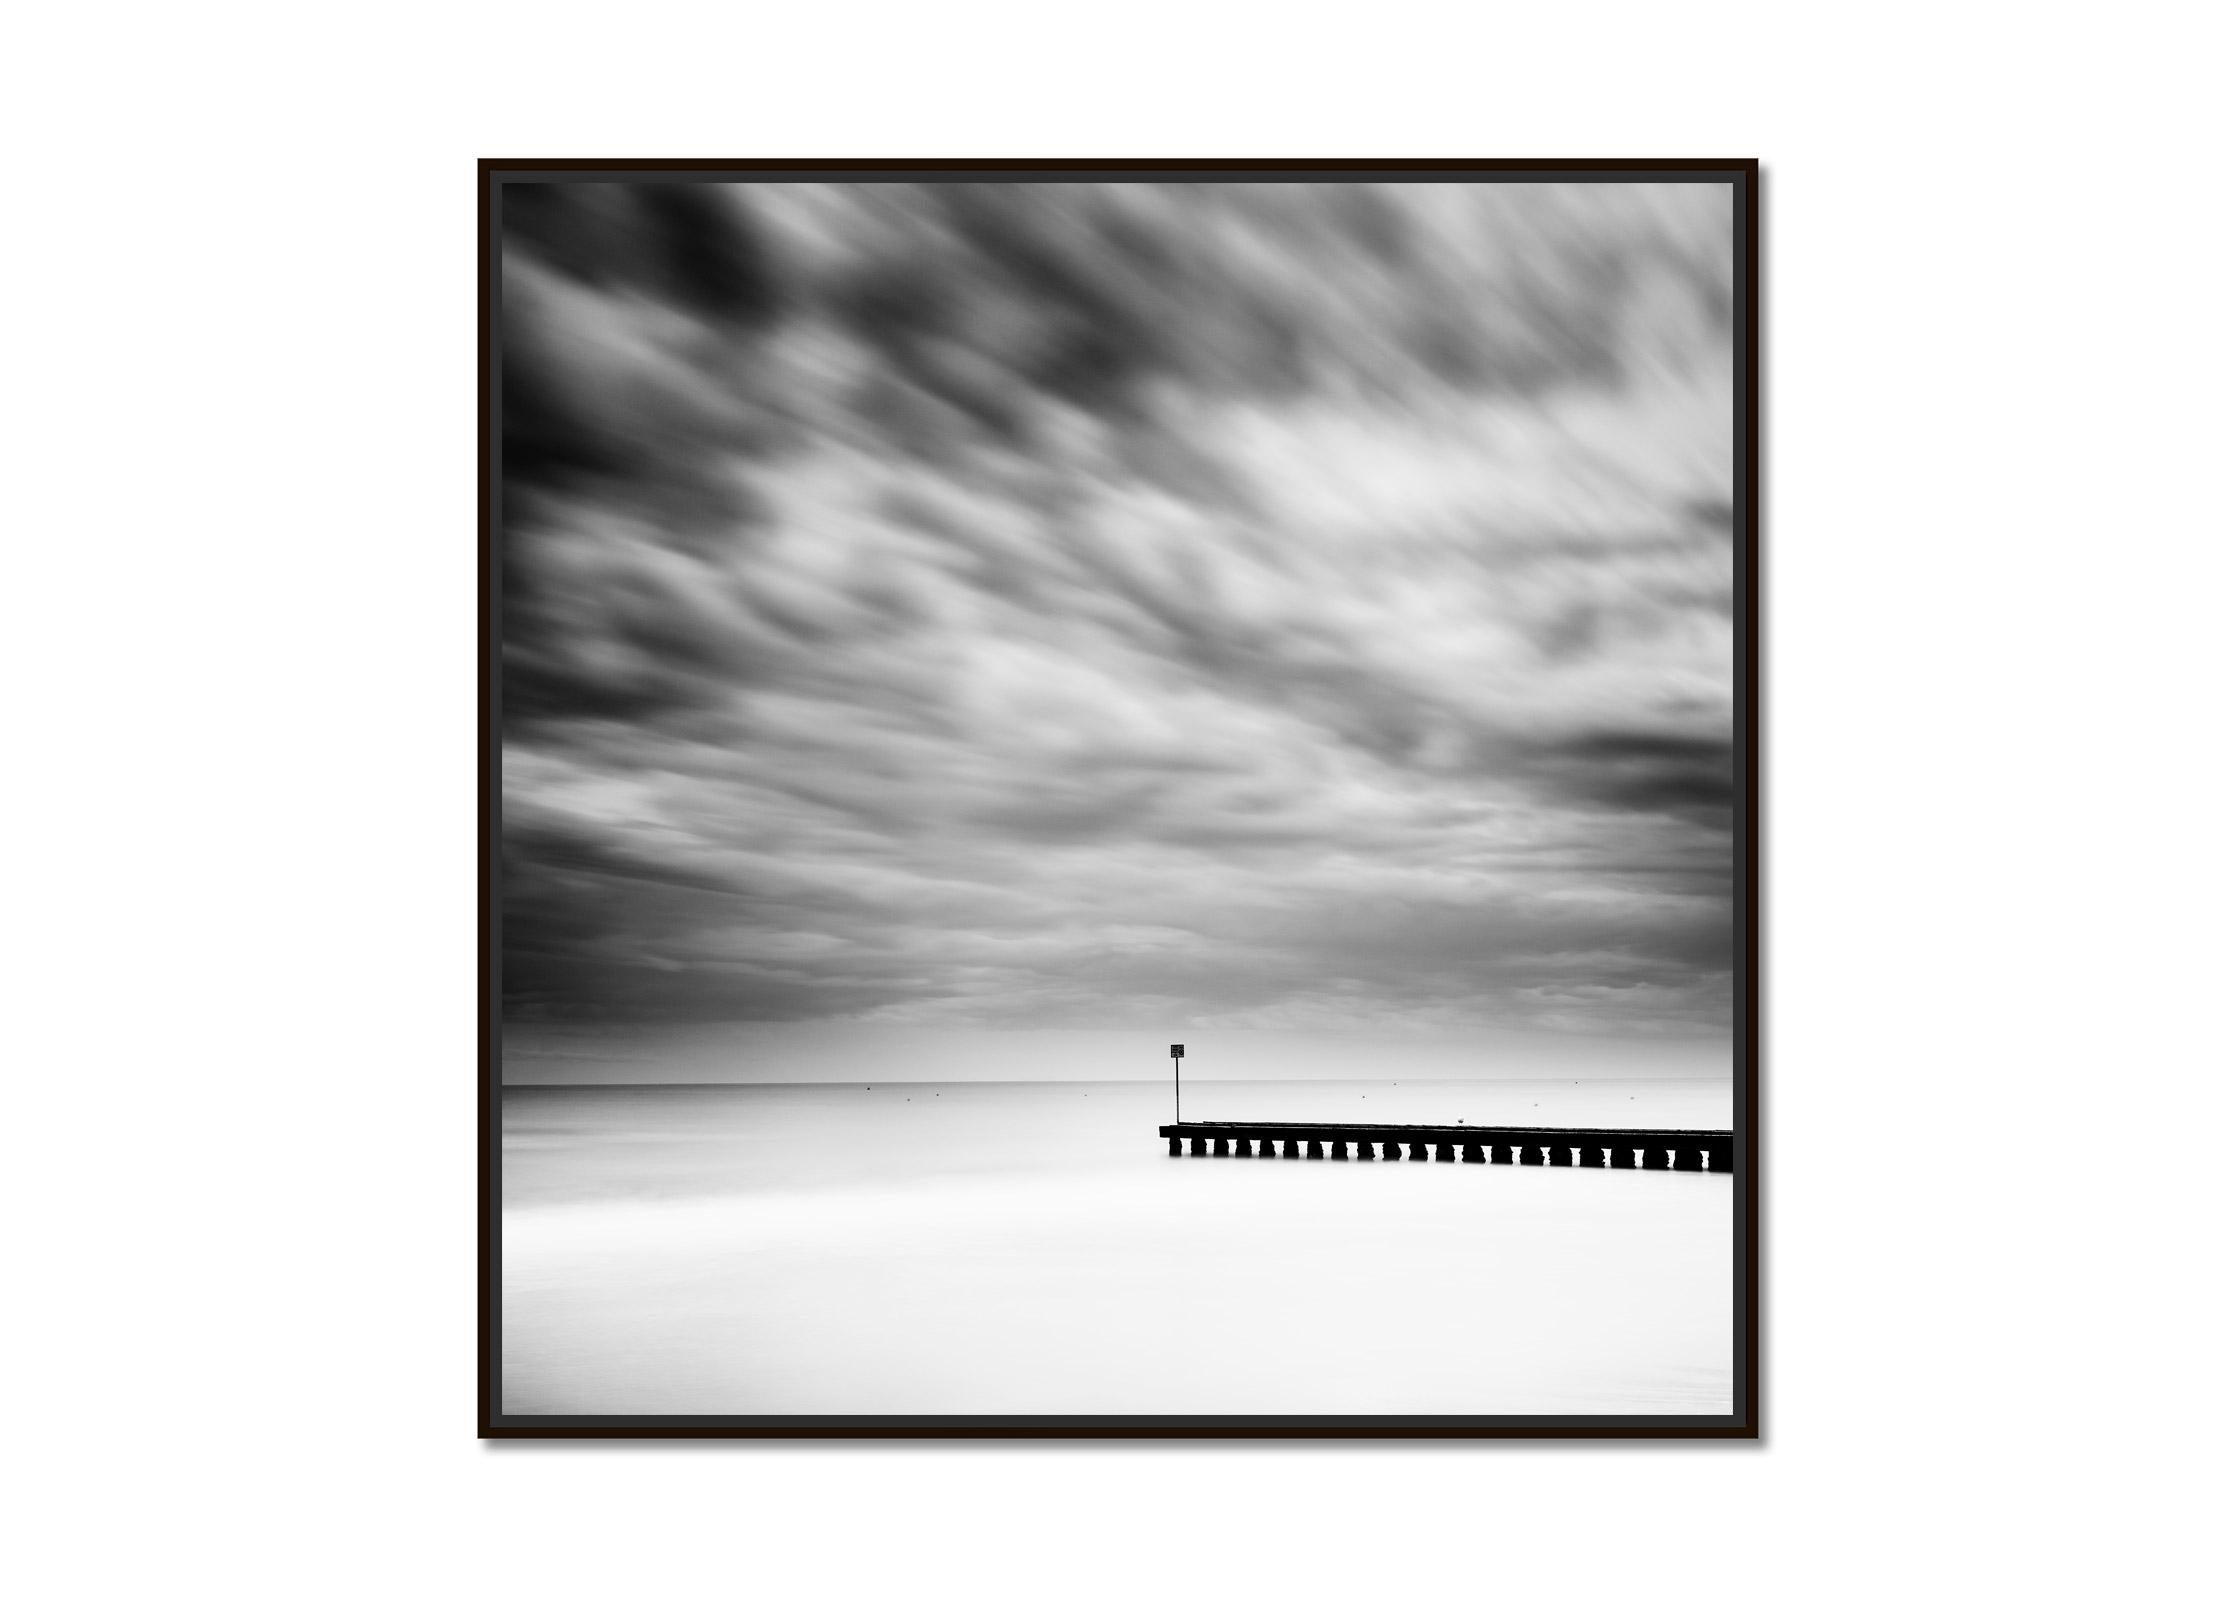 Wooden Pier in the Sea, black and white, long exposure photography, landscape - Photograph by Gerald Berghammer